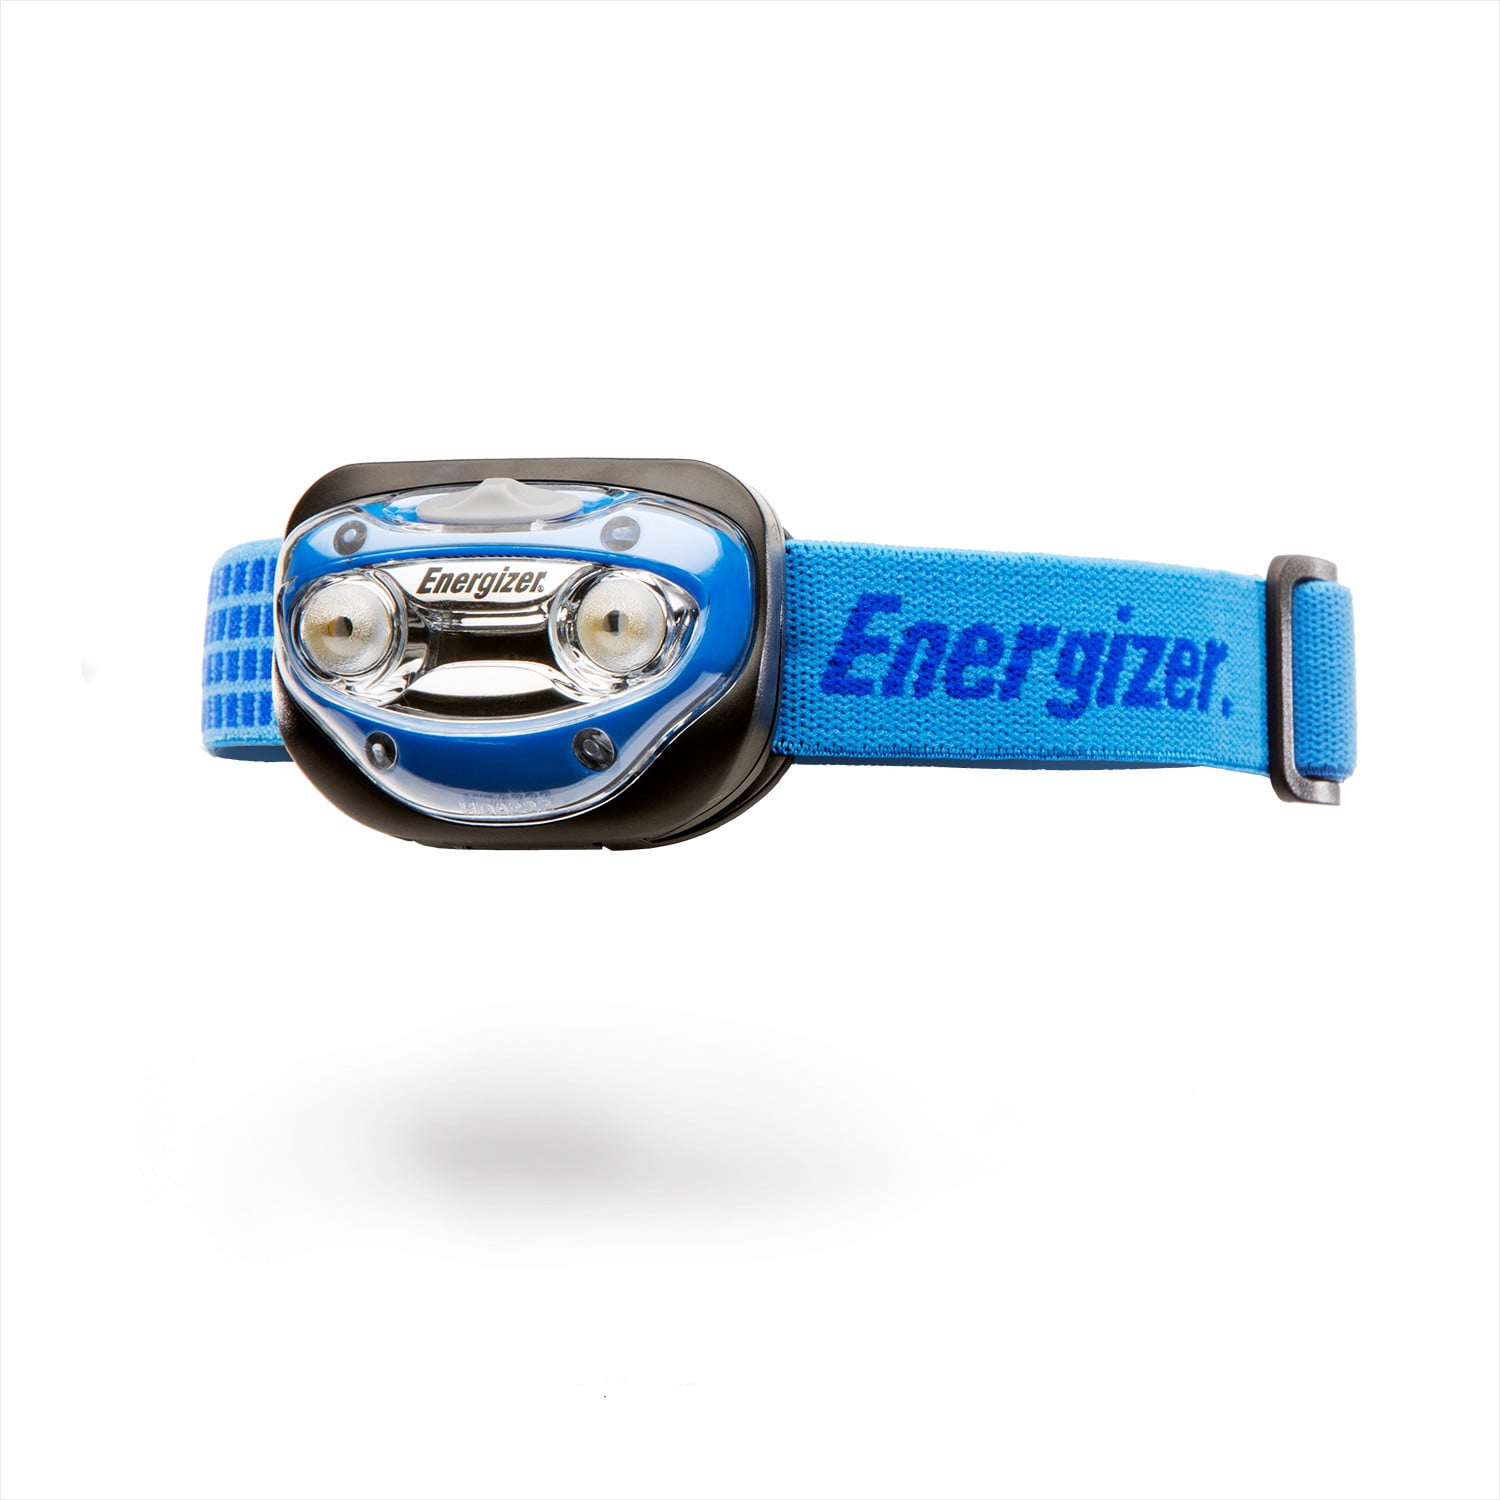 Energizer Vision LED Headlamp, 200 Lumens, (3) AAA Batteries Included